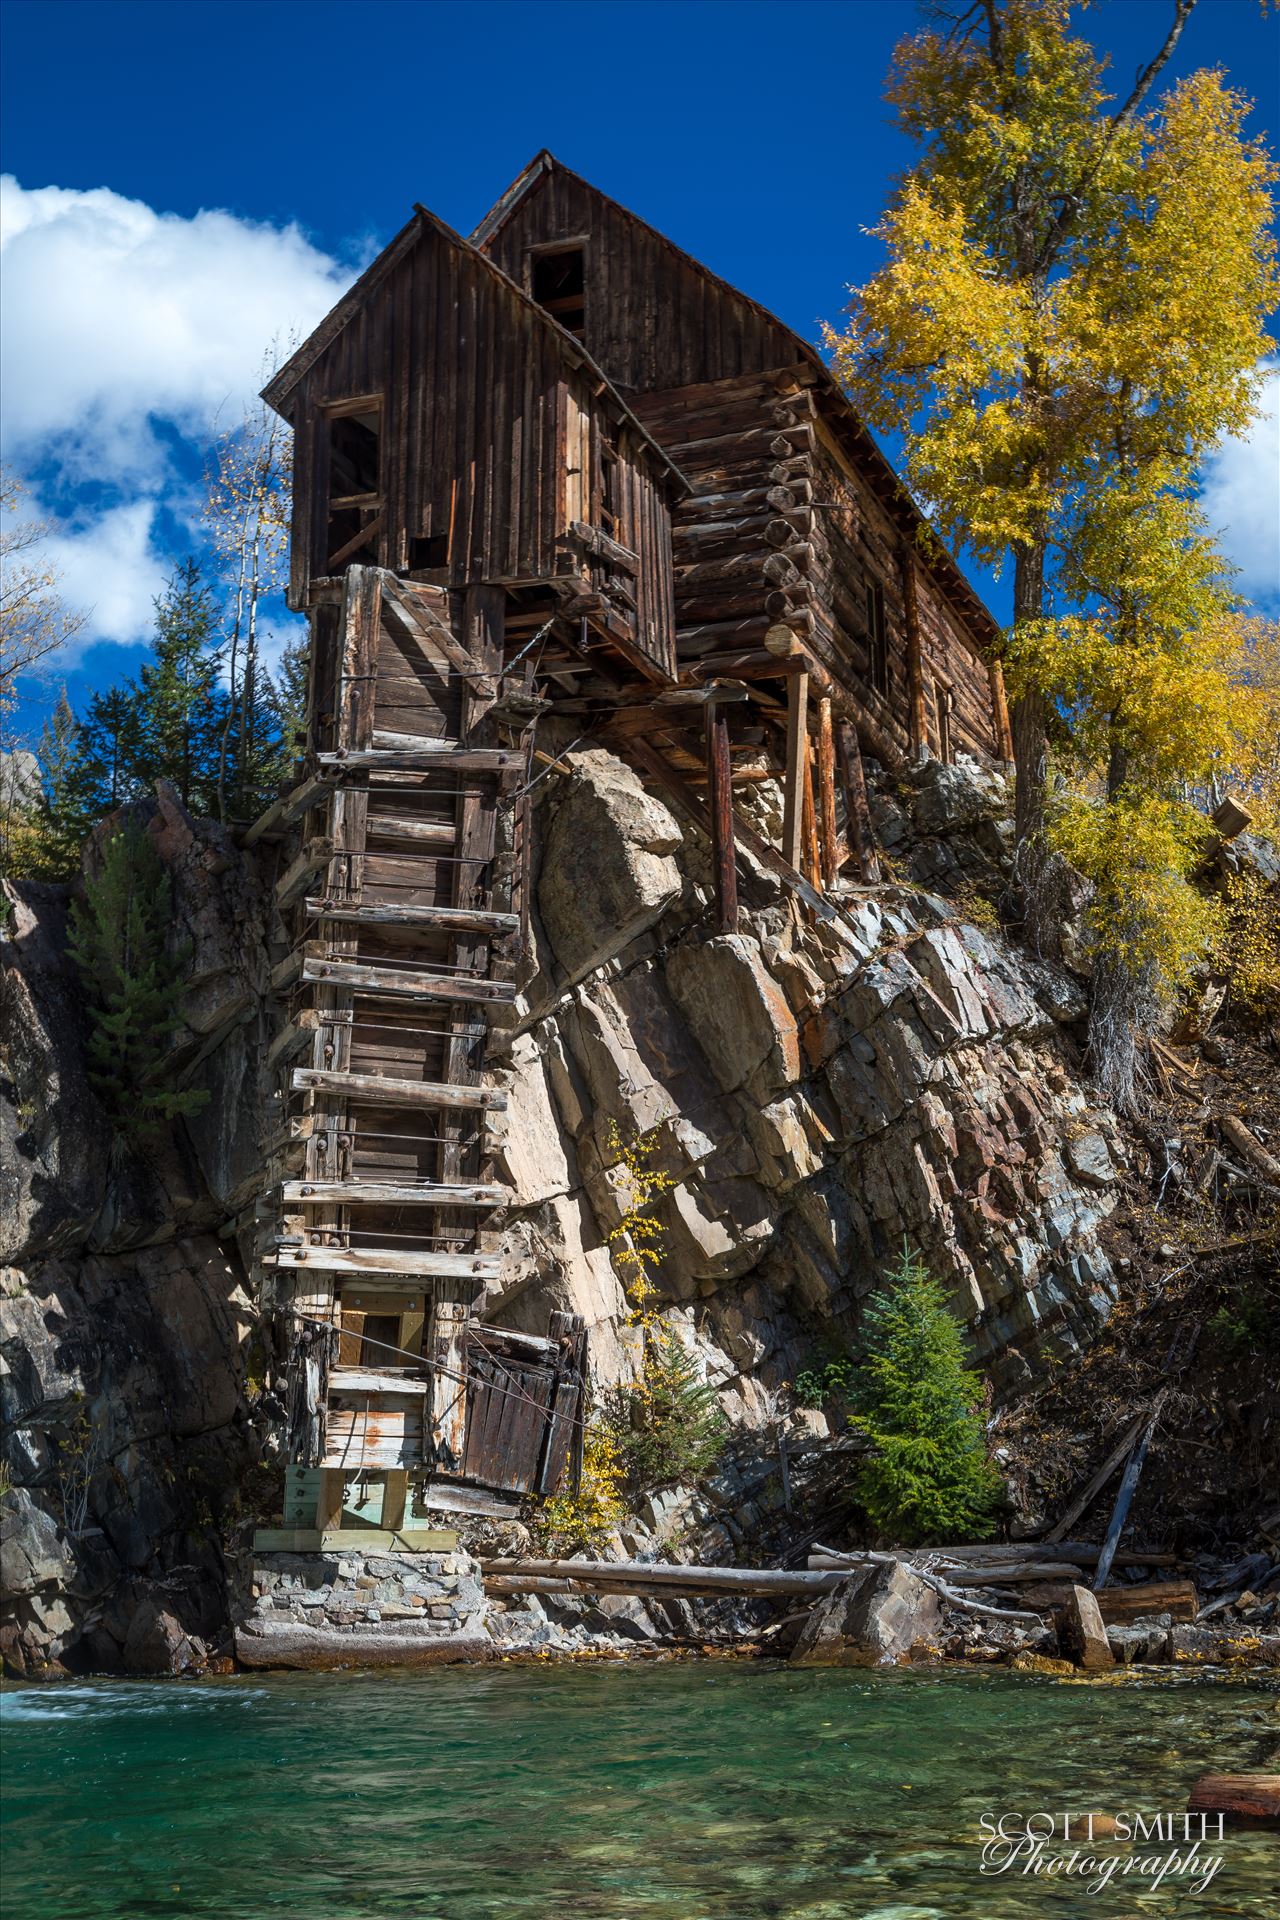 Crystal Mill, Colorado 05 The Crystal Mill, or the Old Mill is an 1892 wooden powerhouse located on an outcrop above the Crystal River in Crystal, Colorado by Scott Smith Photos